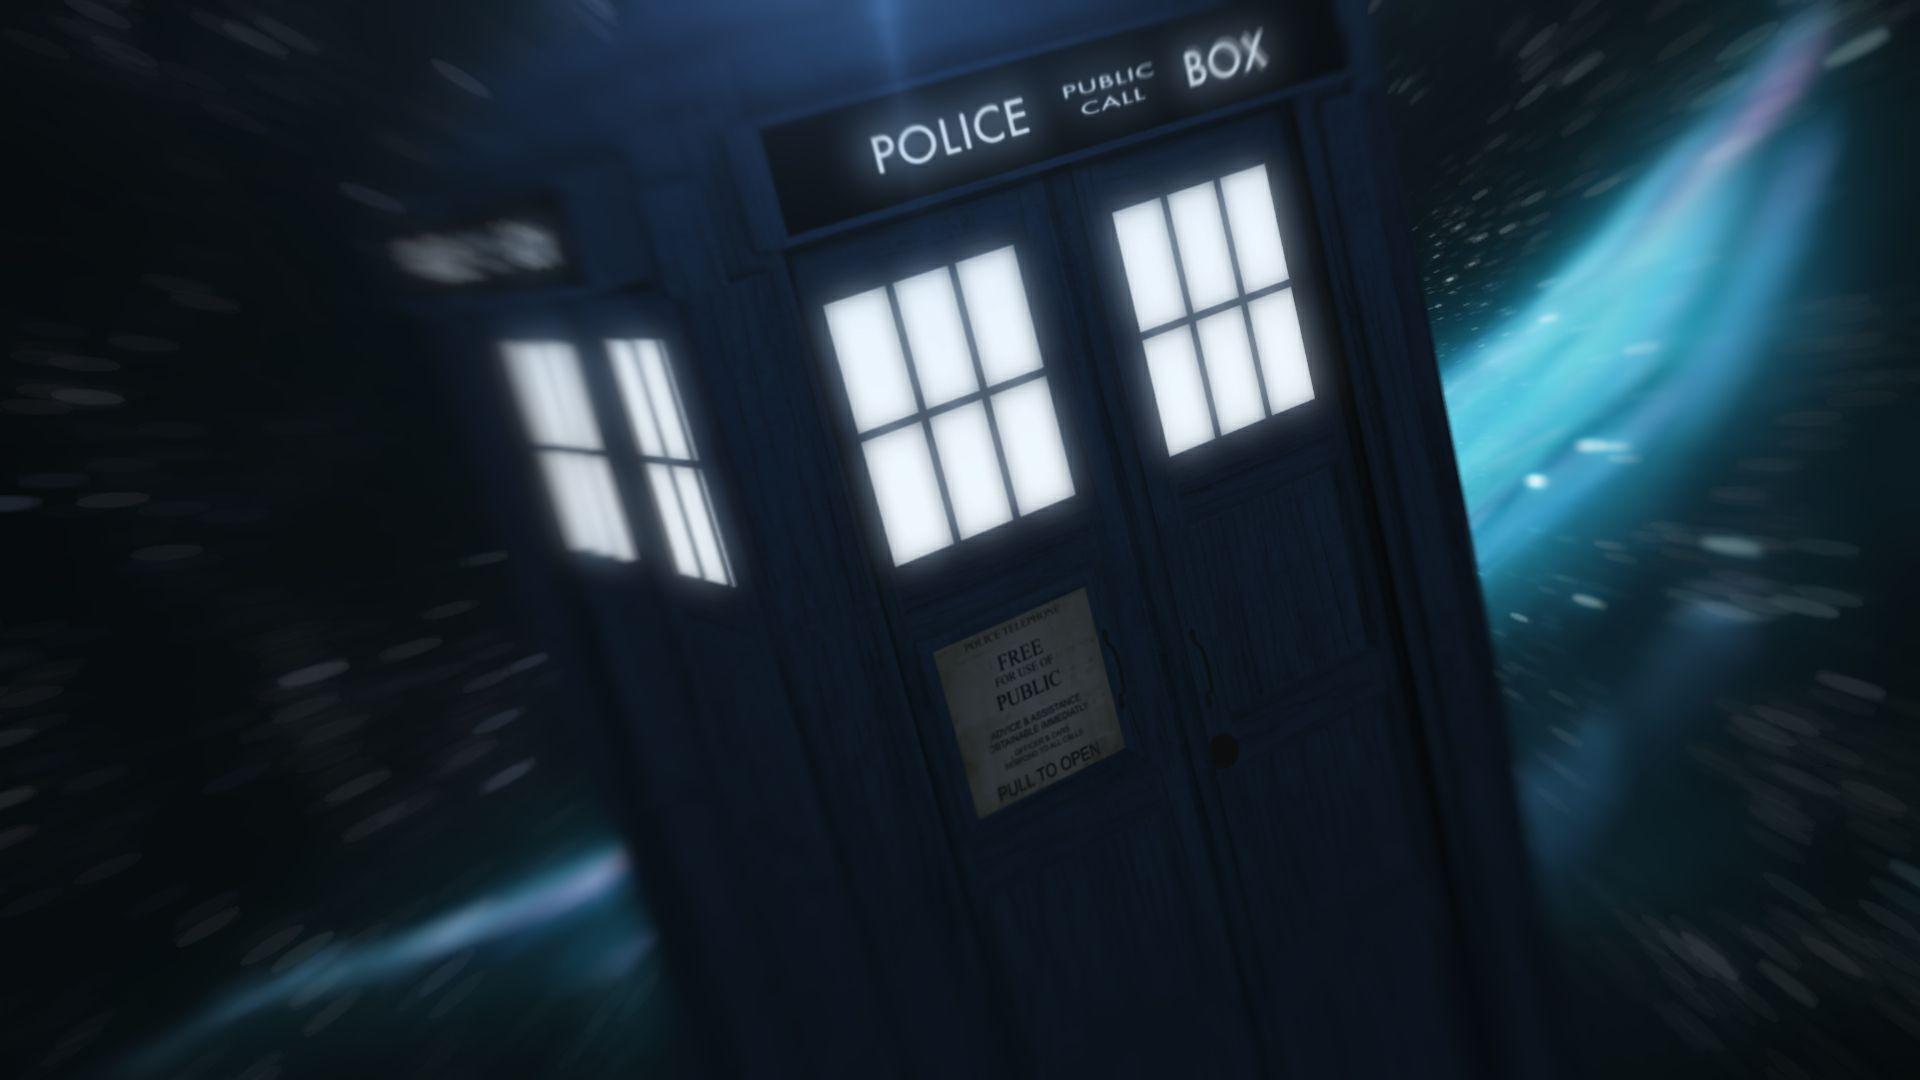 space, TV, Police Boxes, Michaelmknight, Doctor Who Wallpaper HD